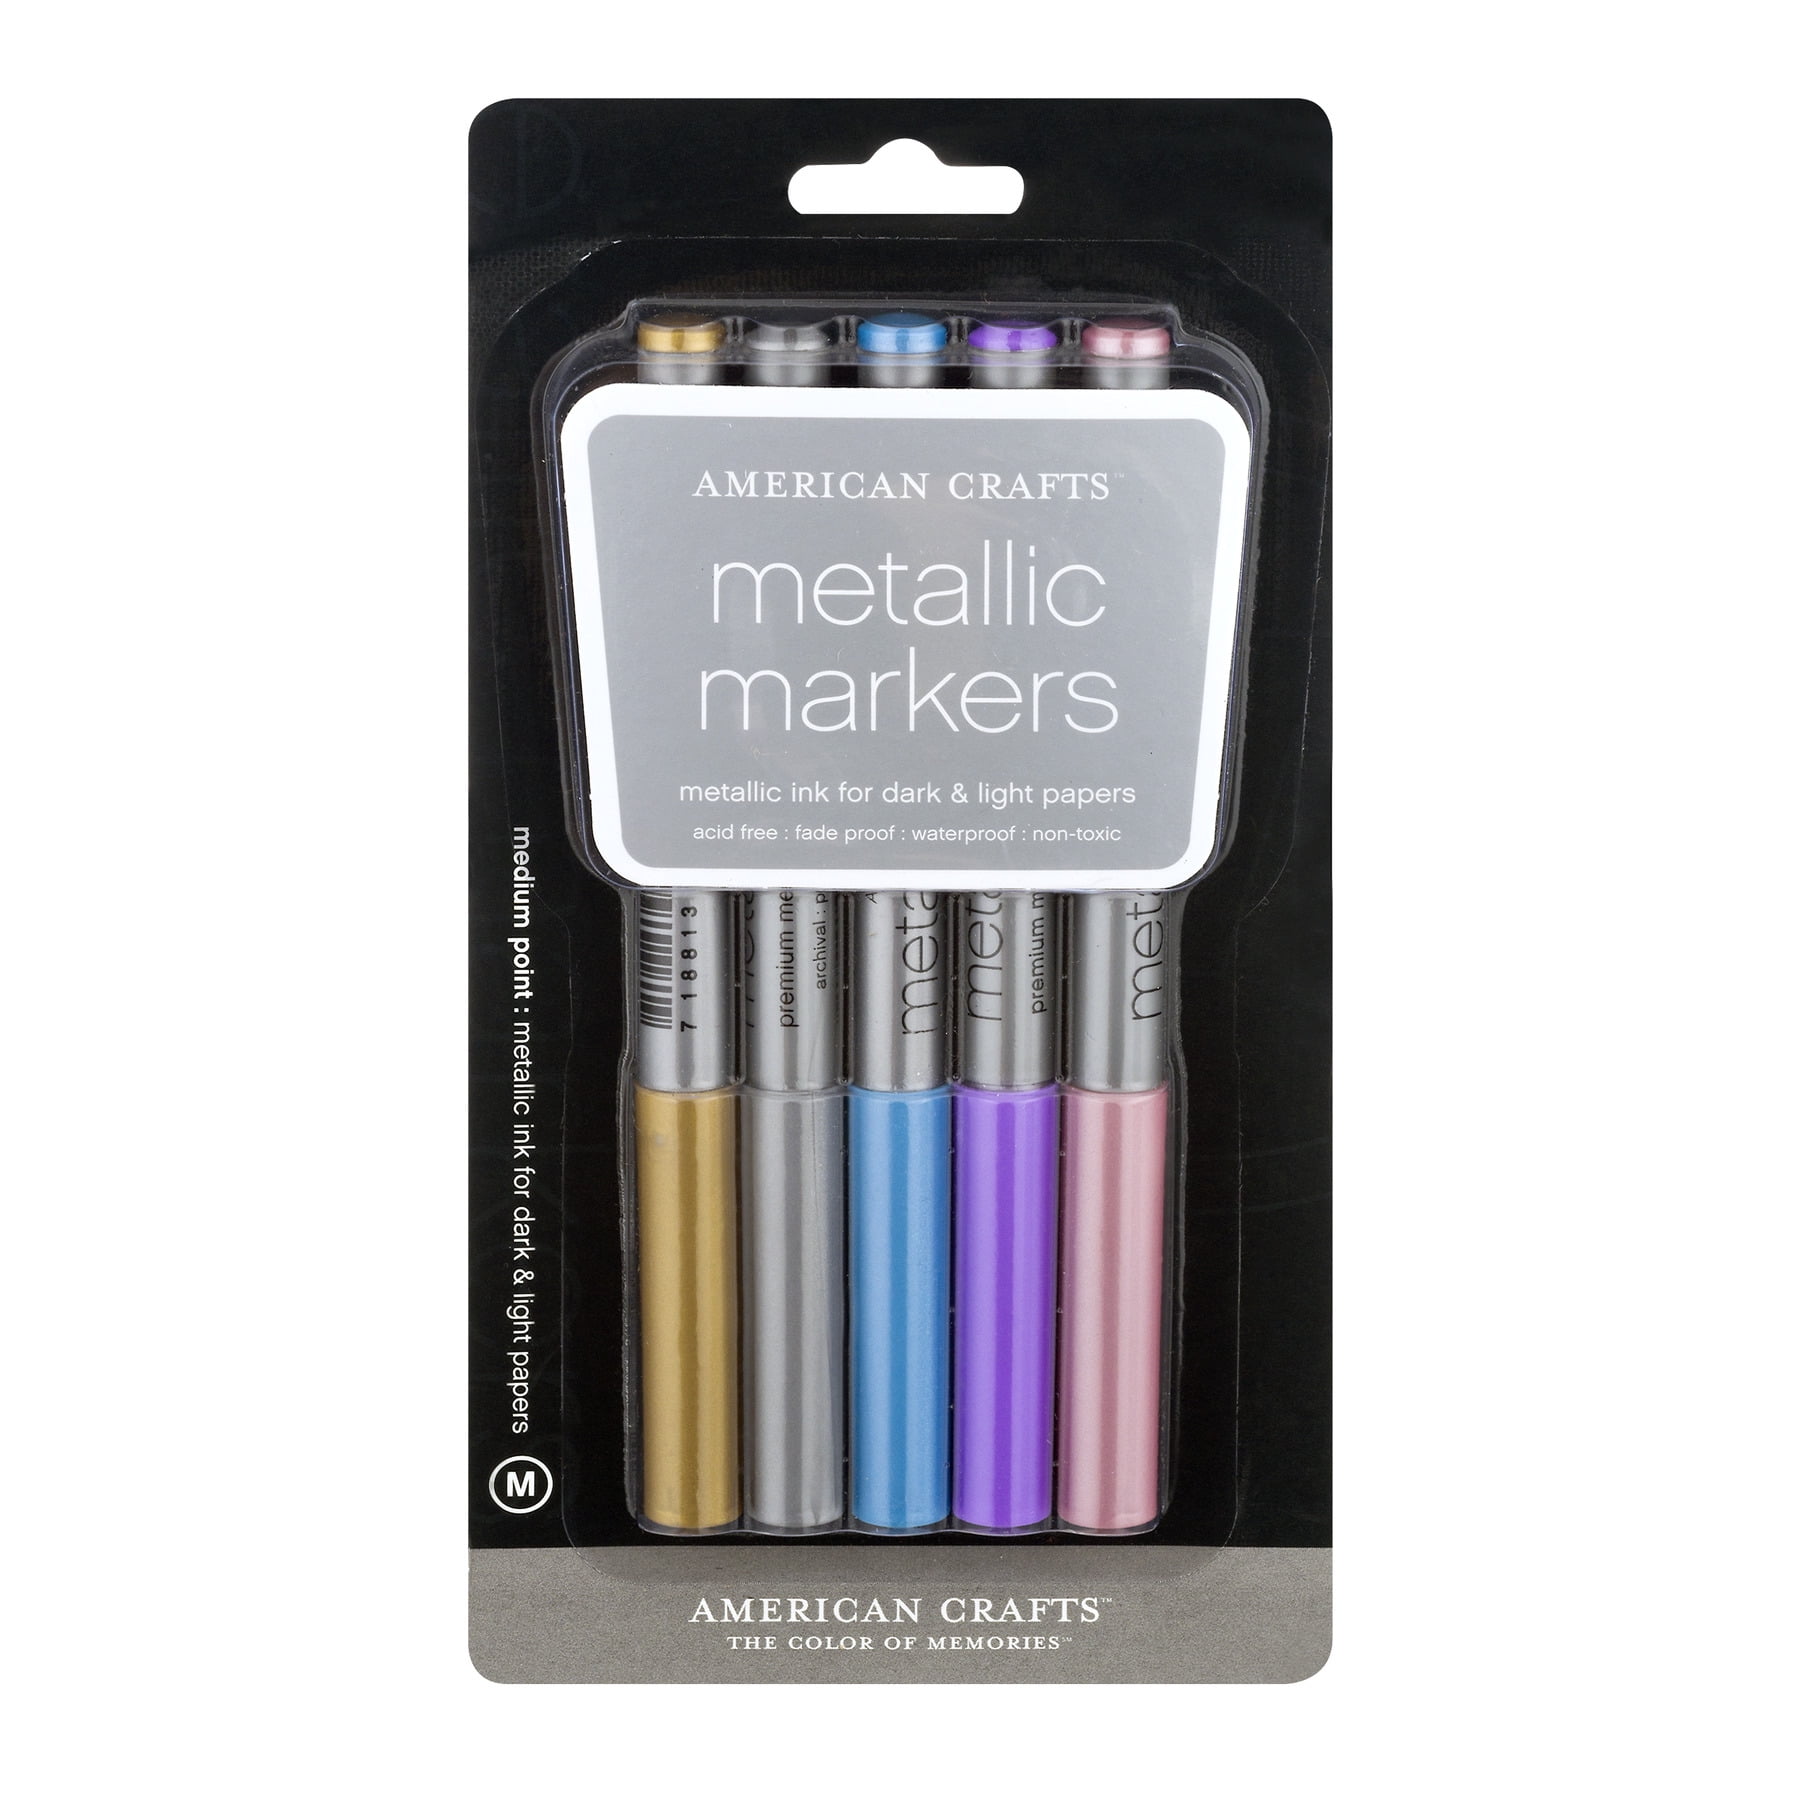 American Crafts Markers, Chalk - 5 markers